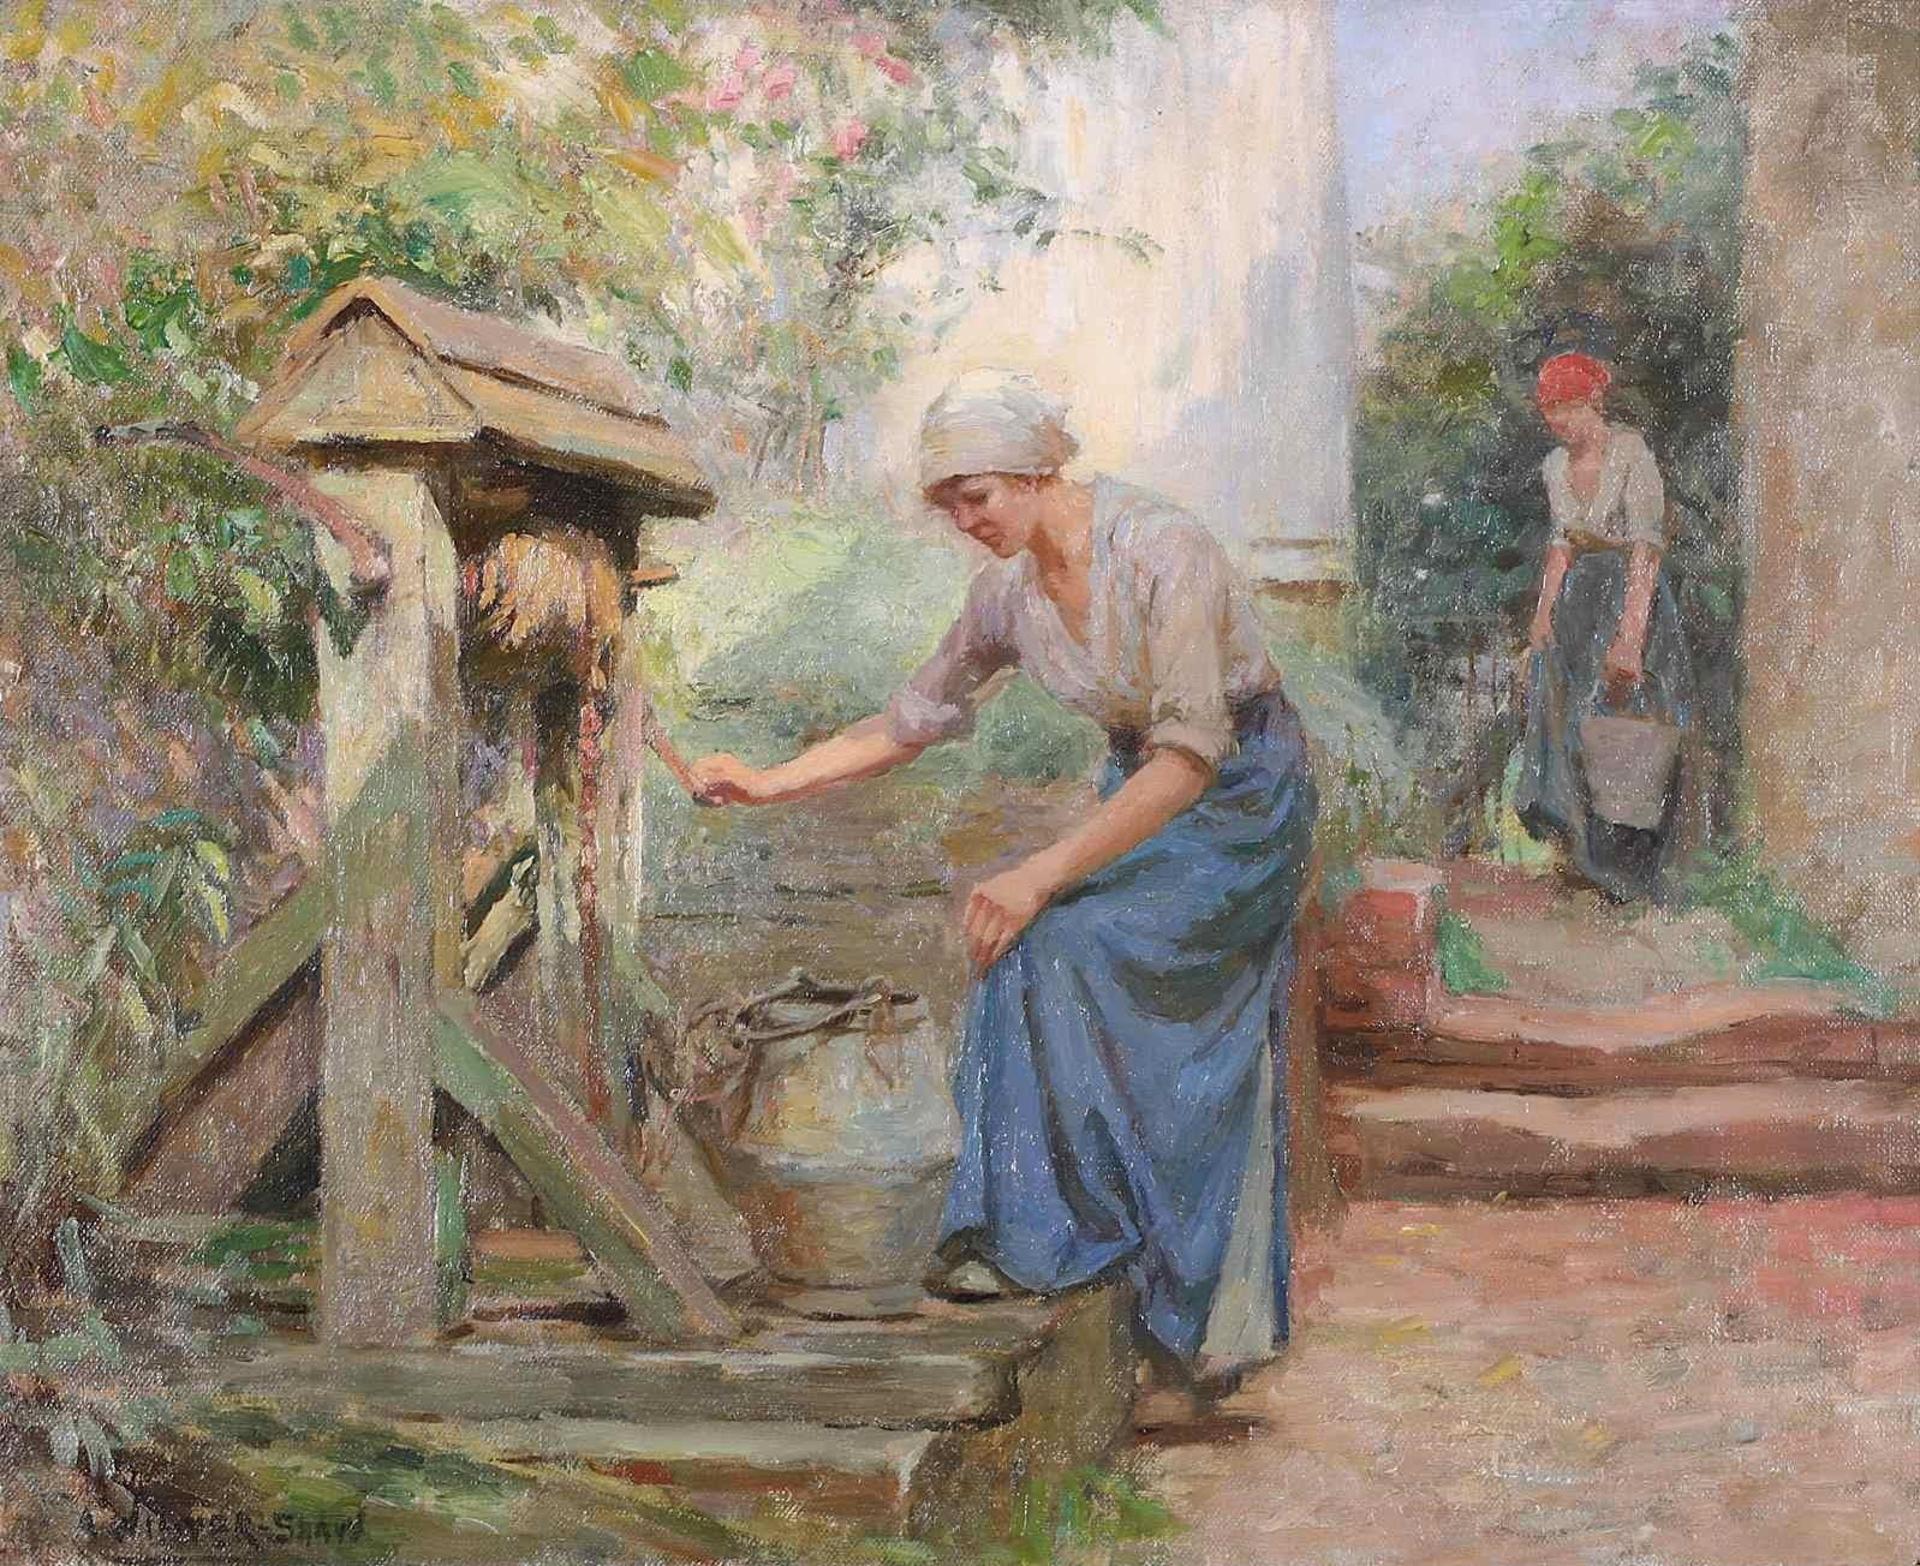 Arthur Winter-Shaw (1869-1948) - At The Well